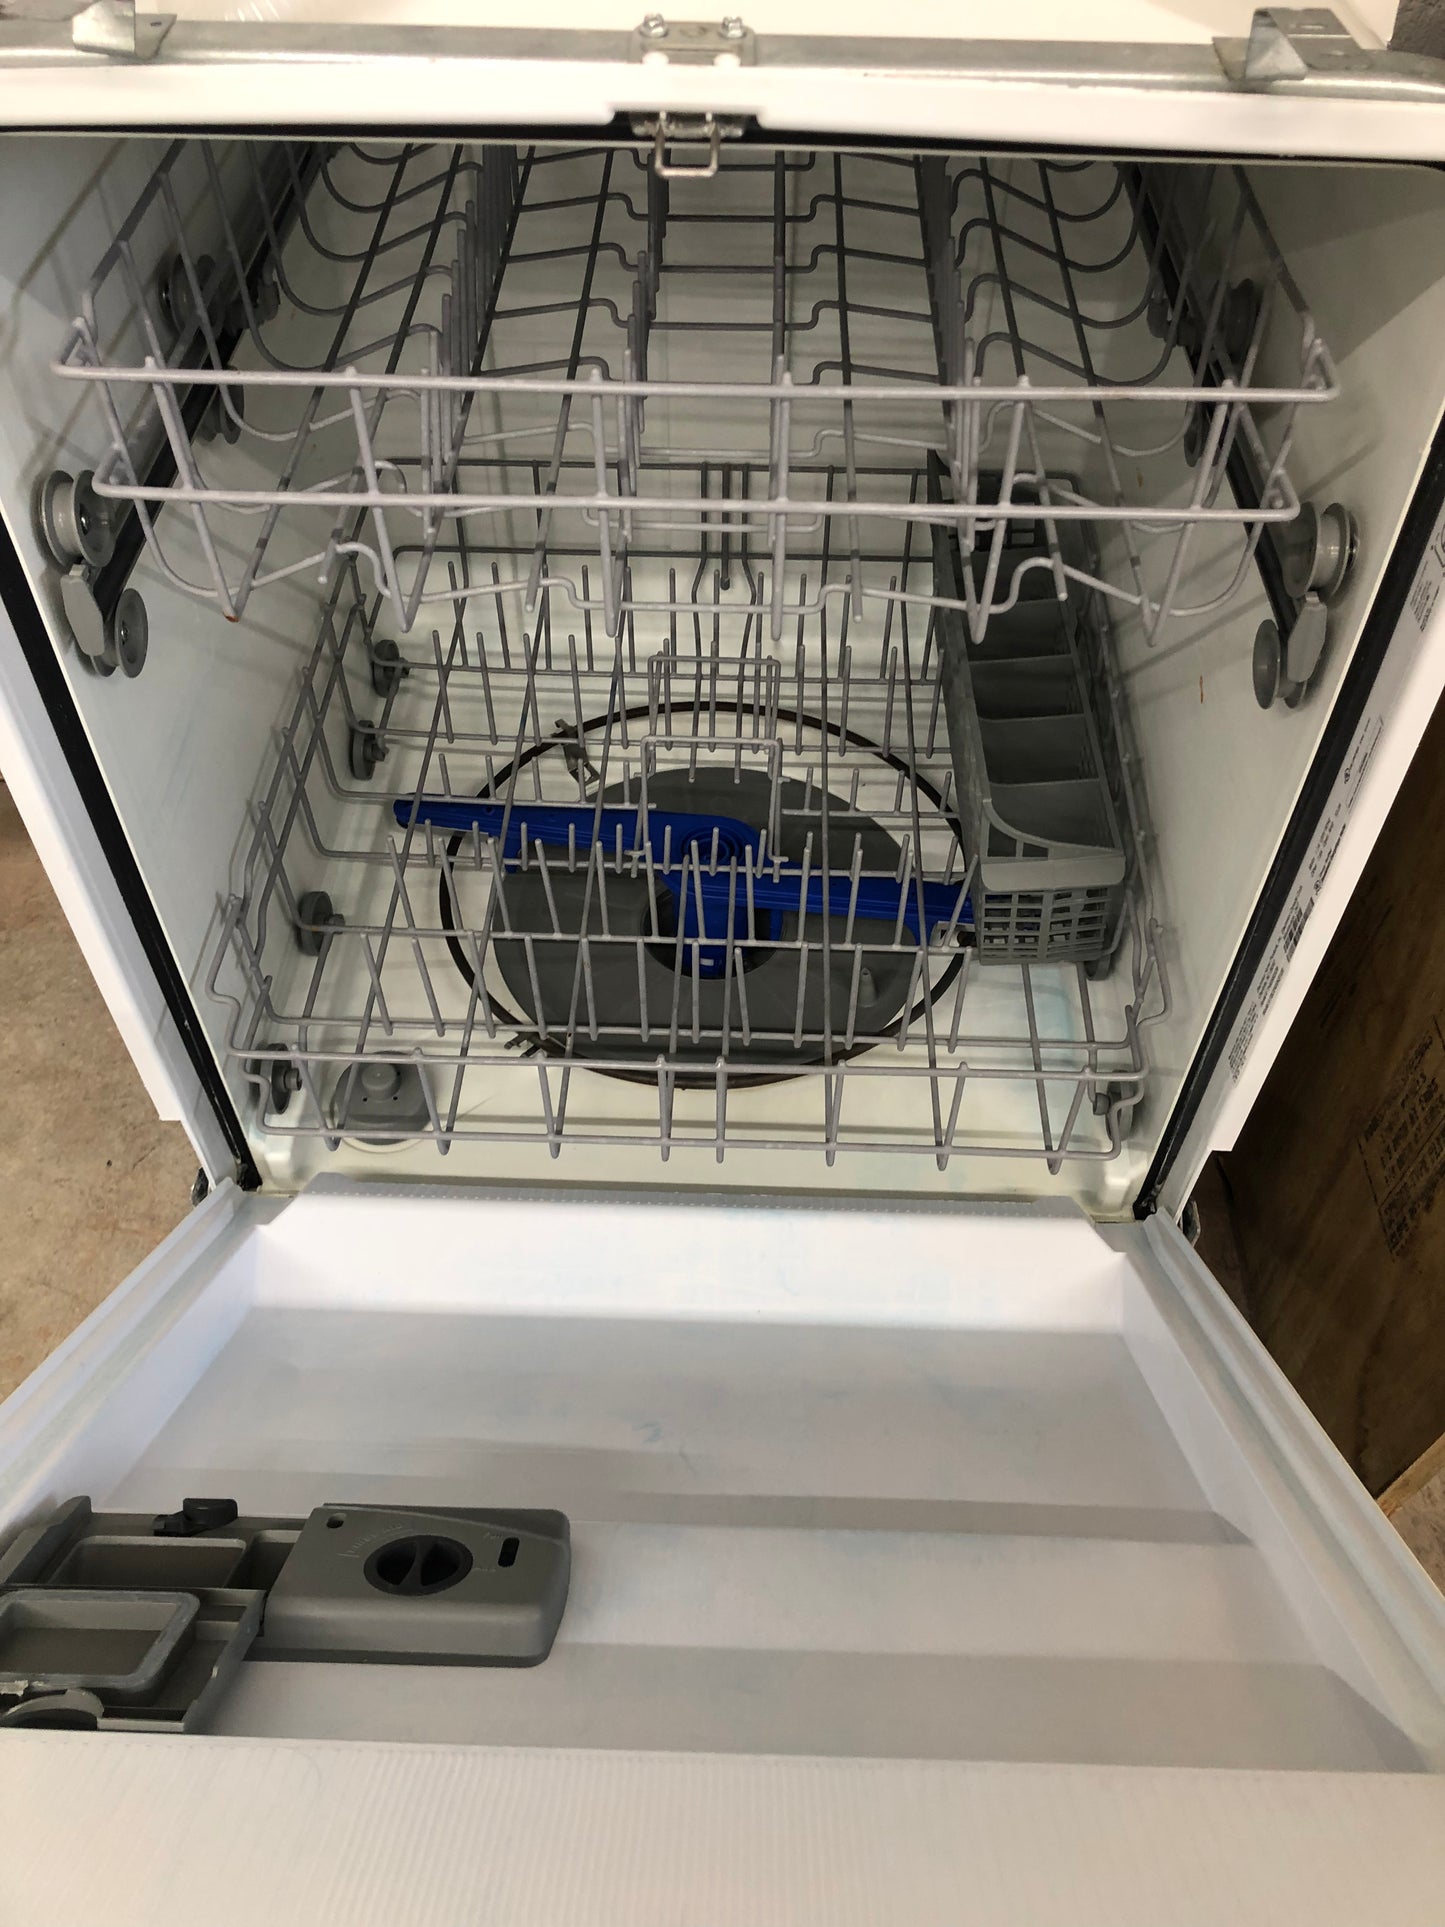 Frigidaire 24" Front Control Smart Built-In Tall Tub Dishwasher